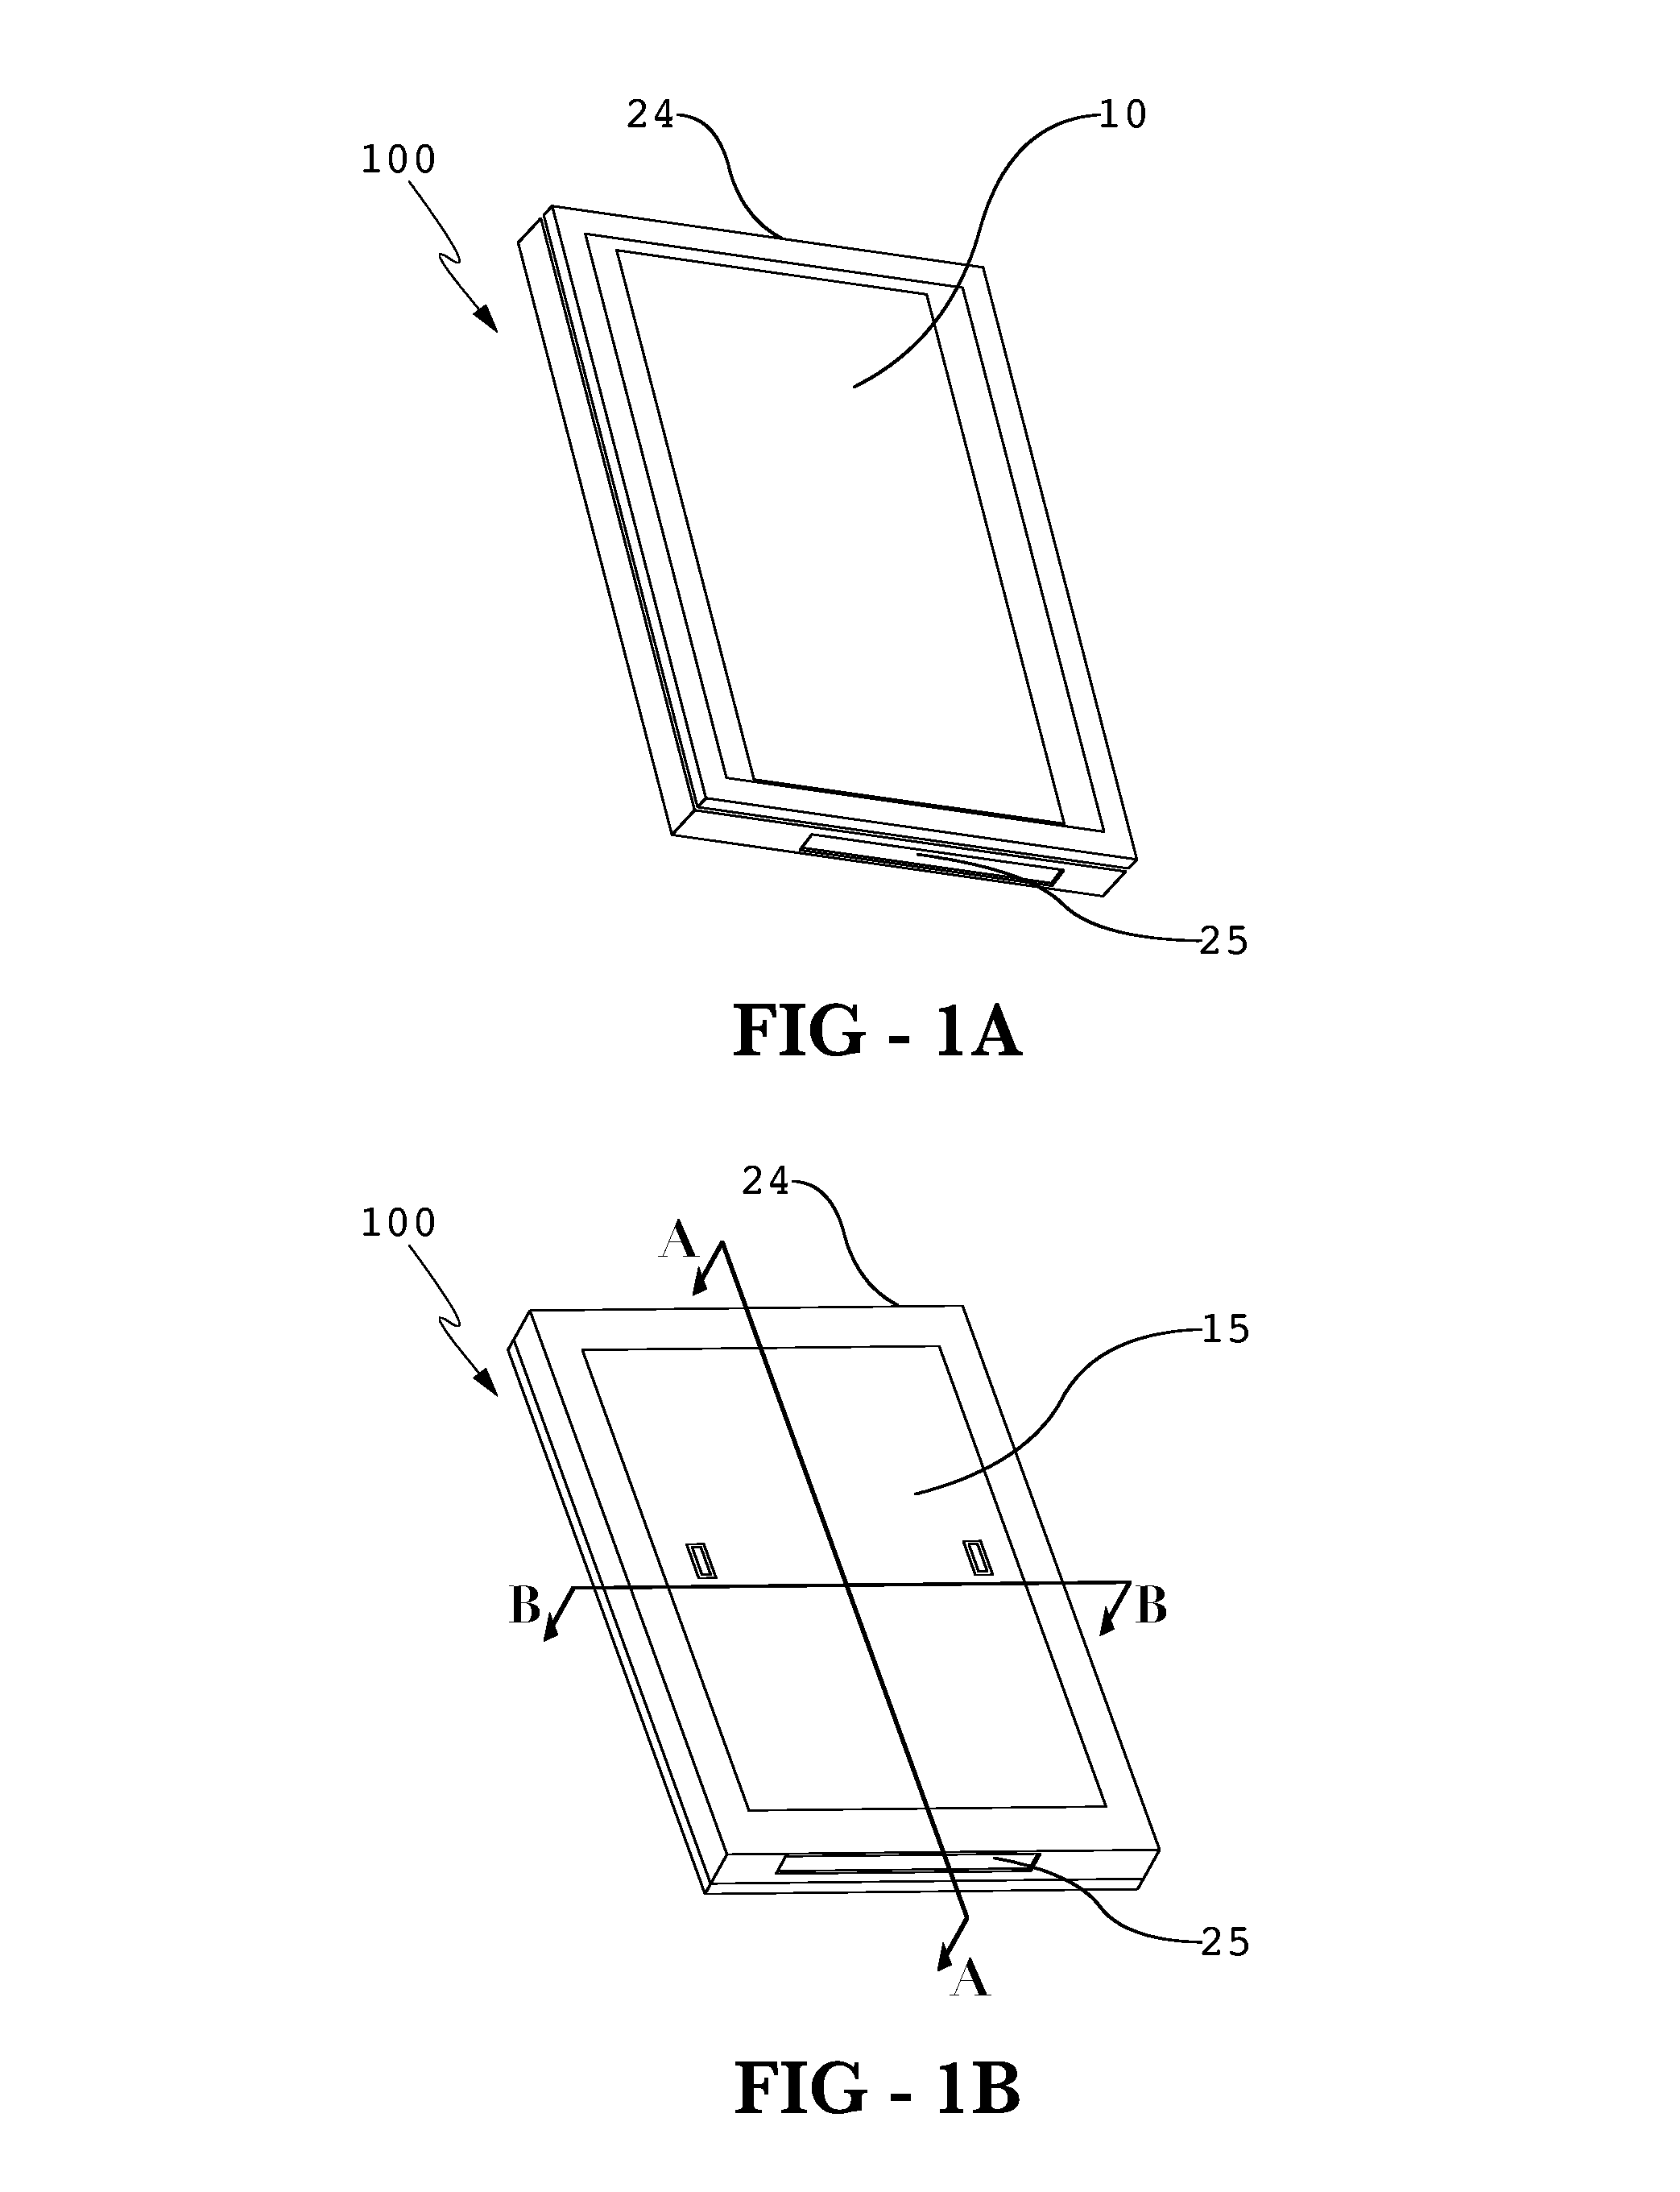 System and method for thermally controlling an electronic display with reduced noise emissions